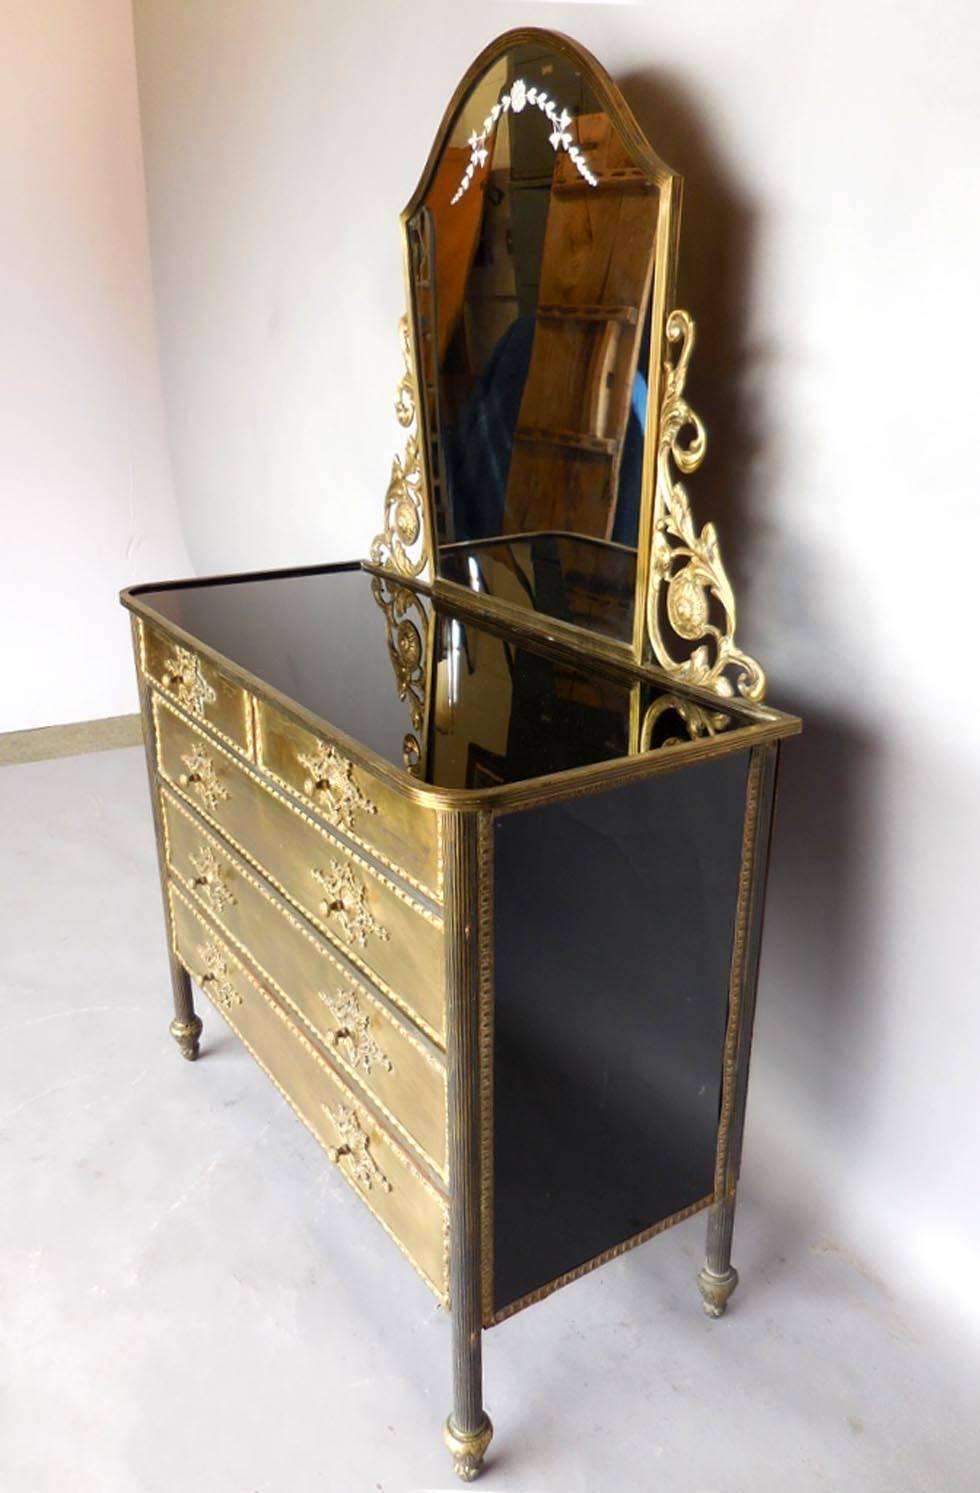 1930s unusual chest of drawers. Top and sides are black glass. Etched vanity mirror and decorative cornices are removable. Gold tone metal drawer fronts. Elaborate pulls. All original. Height without mirror is 31 H.